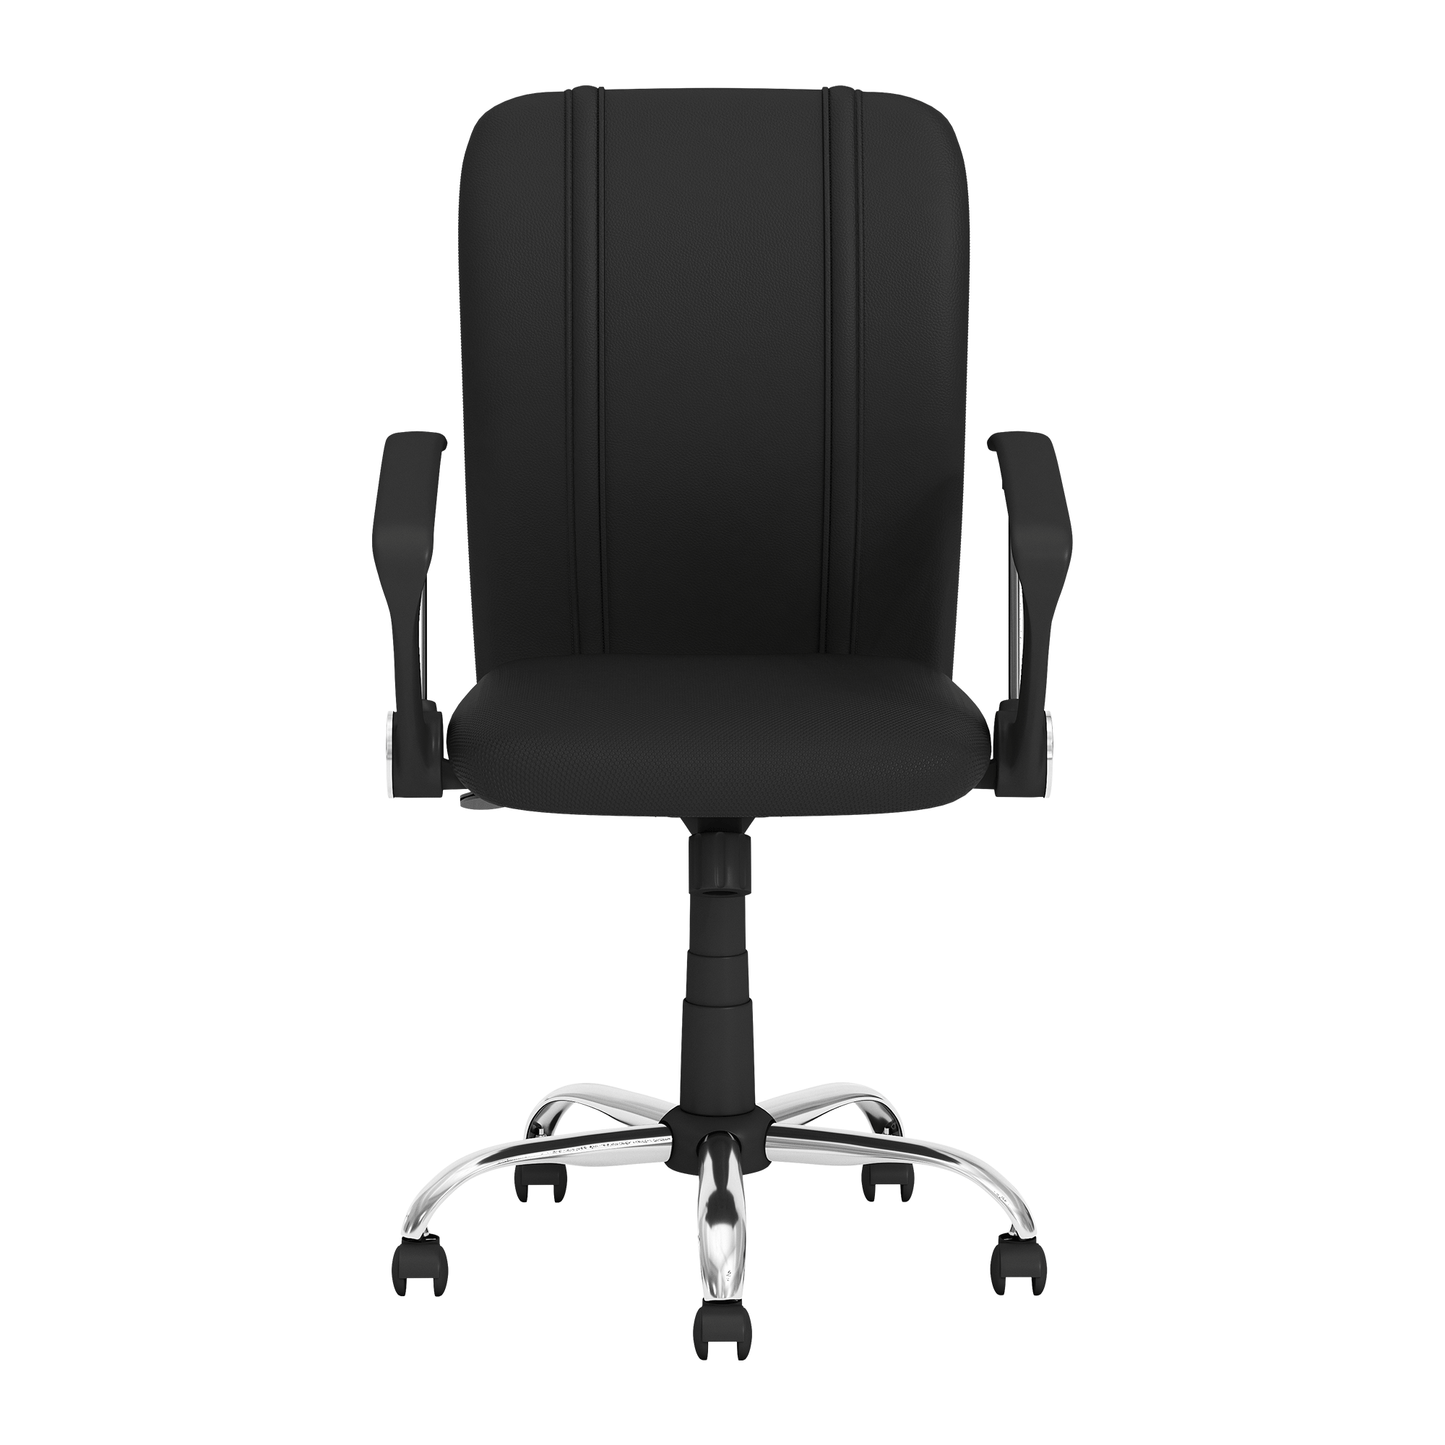 Curve Task Chair with New York Mets Logo